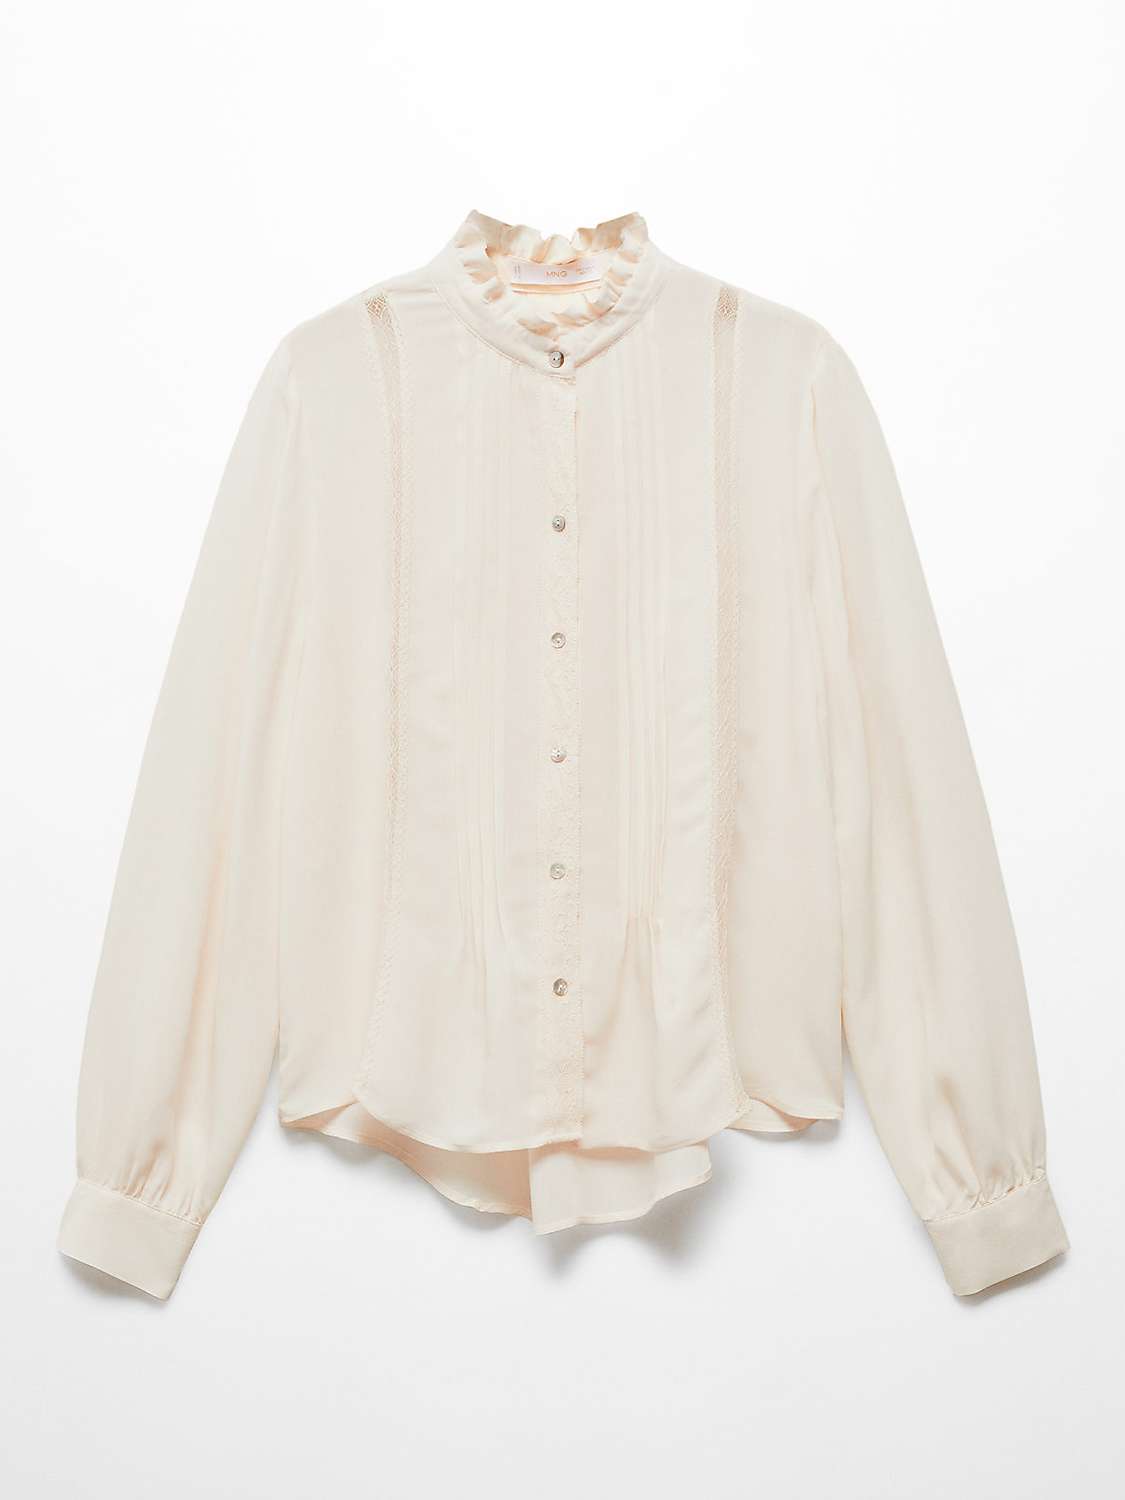 Buy Mango Jaky Lace Trim Frill Collar Blouse, Cream Online at johnlewis.com